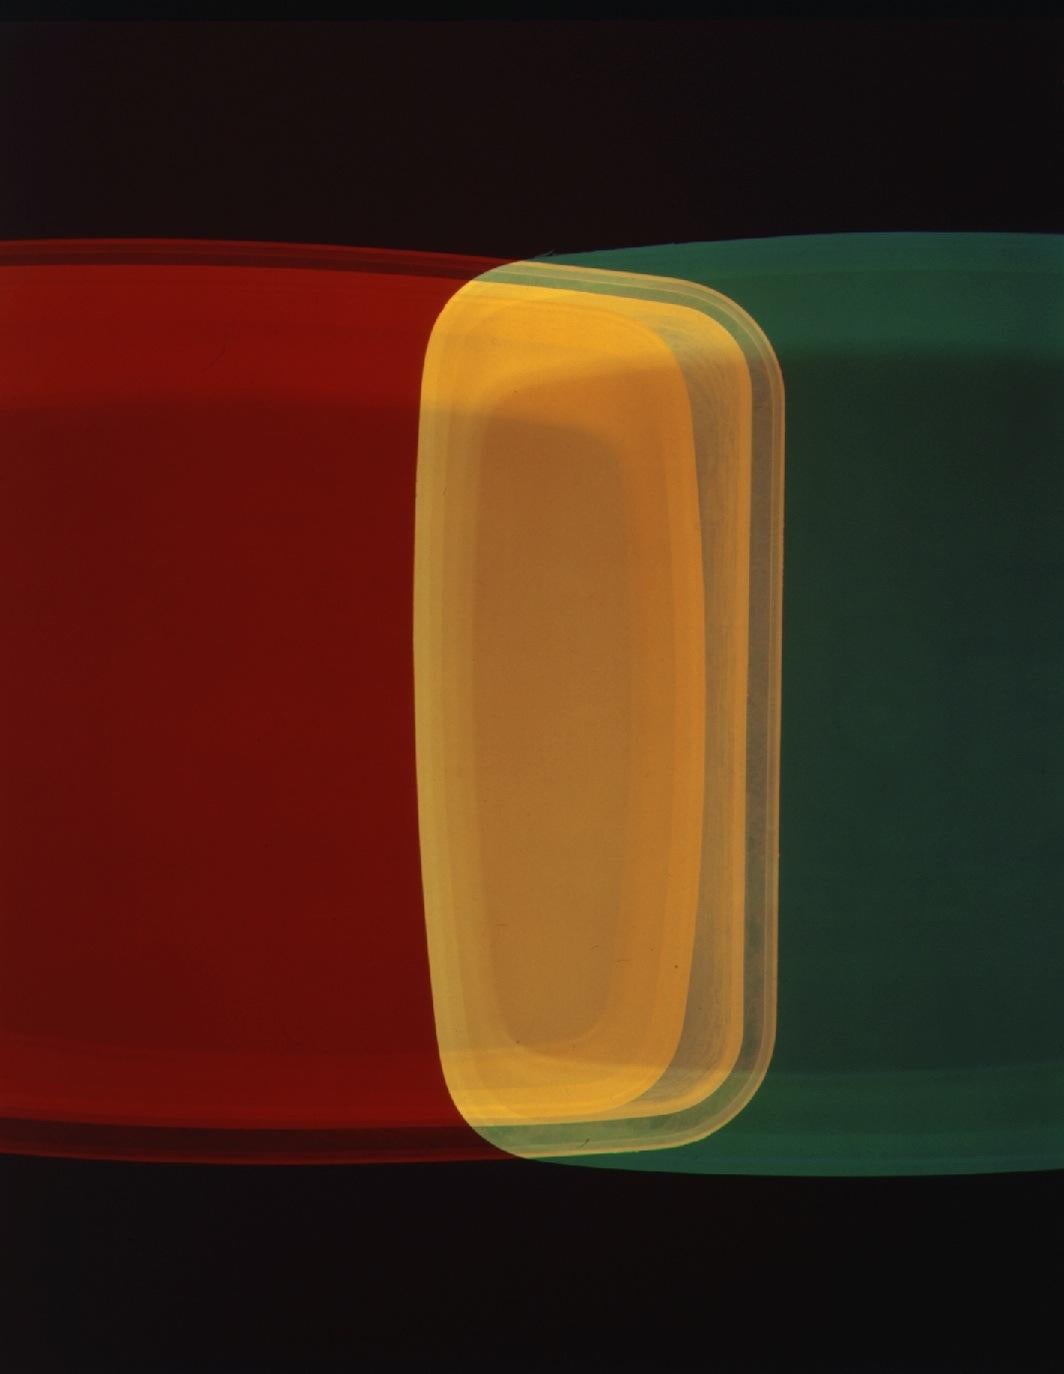 Richard Caldicott Abstract Photograph - Tupperware, yellow, Green, Red abstraction, photography